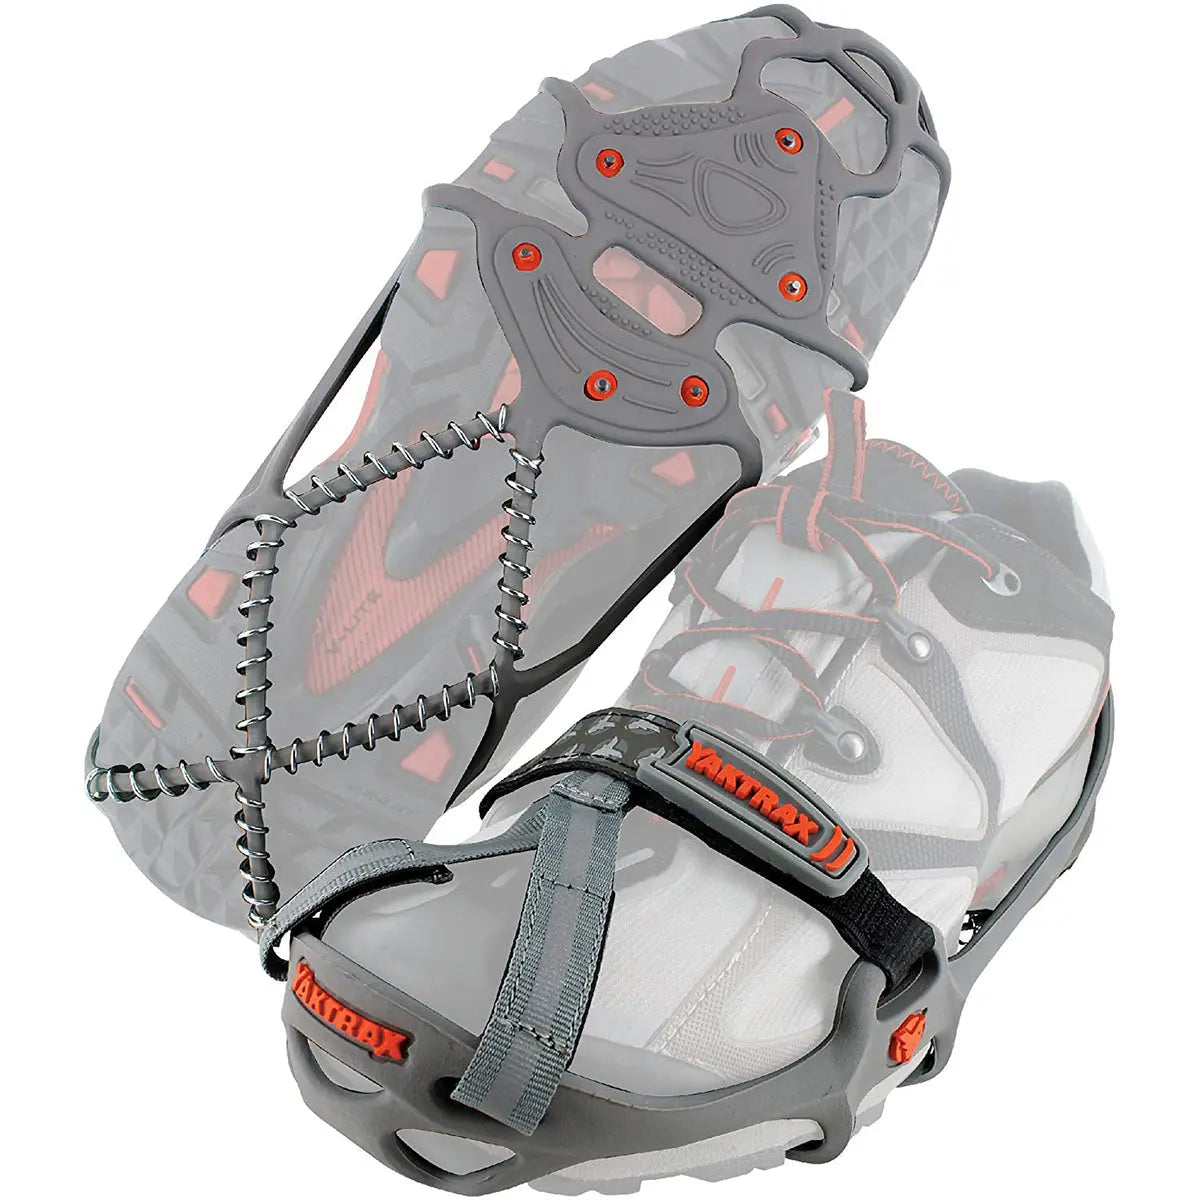 Yaktrax Run Winter Traction Cleats for Snow and Ice - Gray Yaktrax